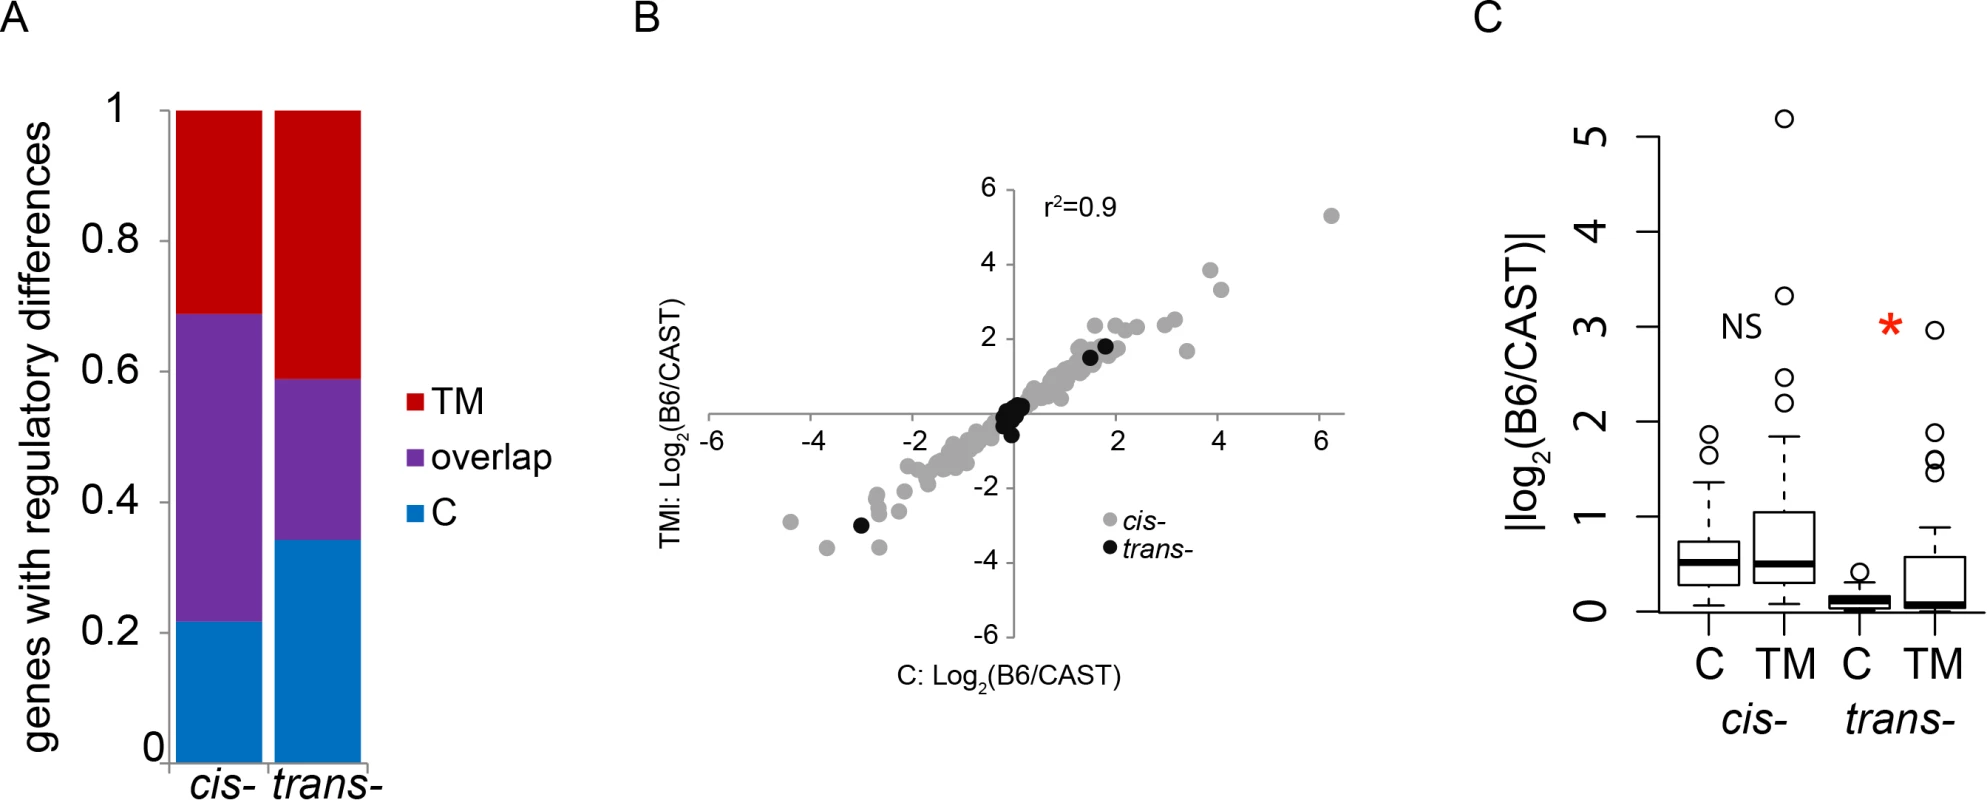 ER stress alters the genes that display regulatory differences between B6 and CAST.